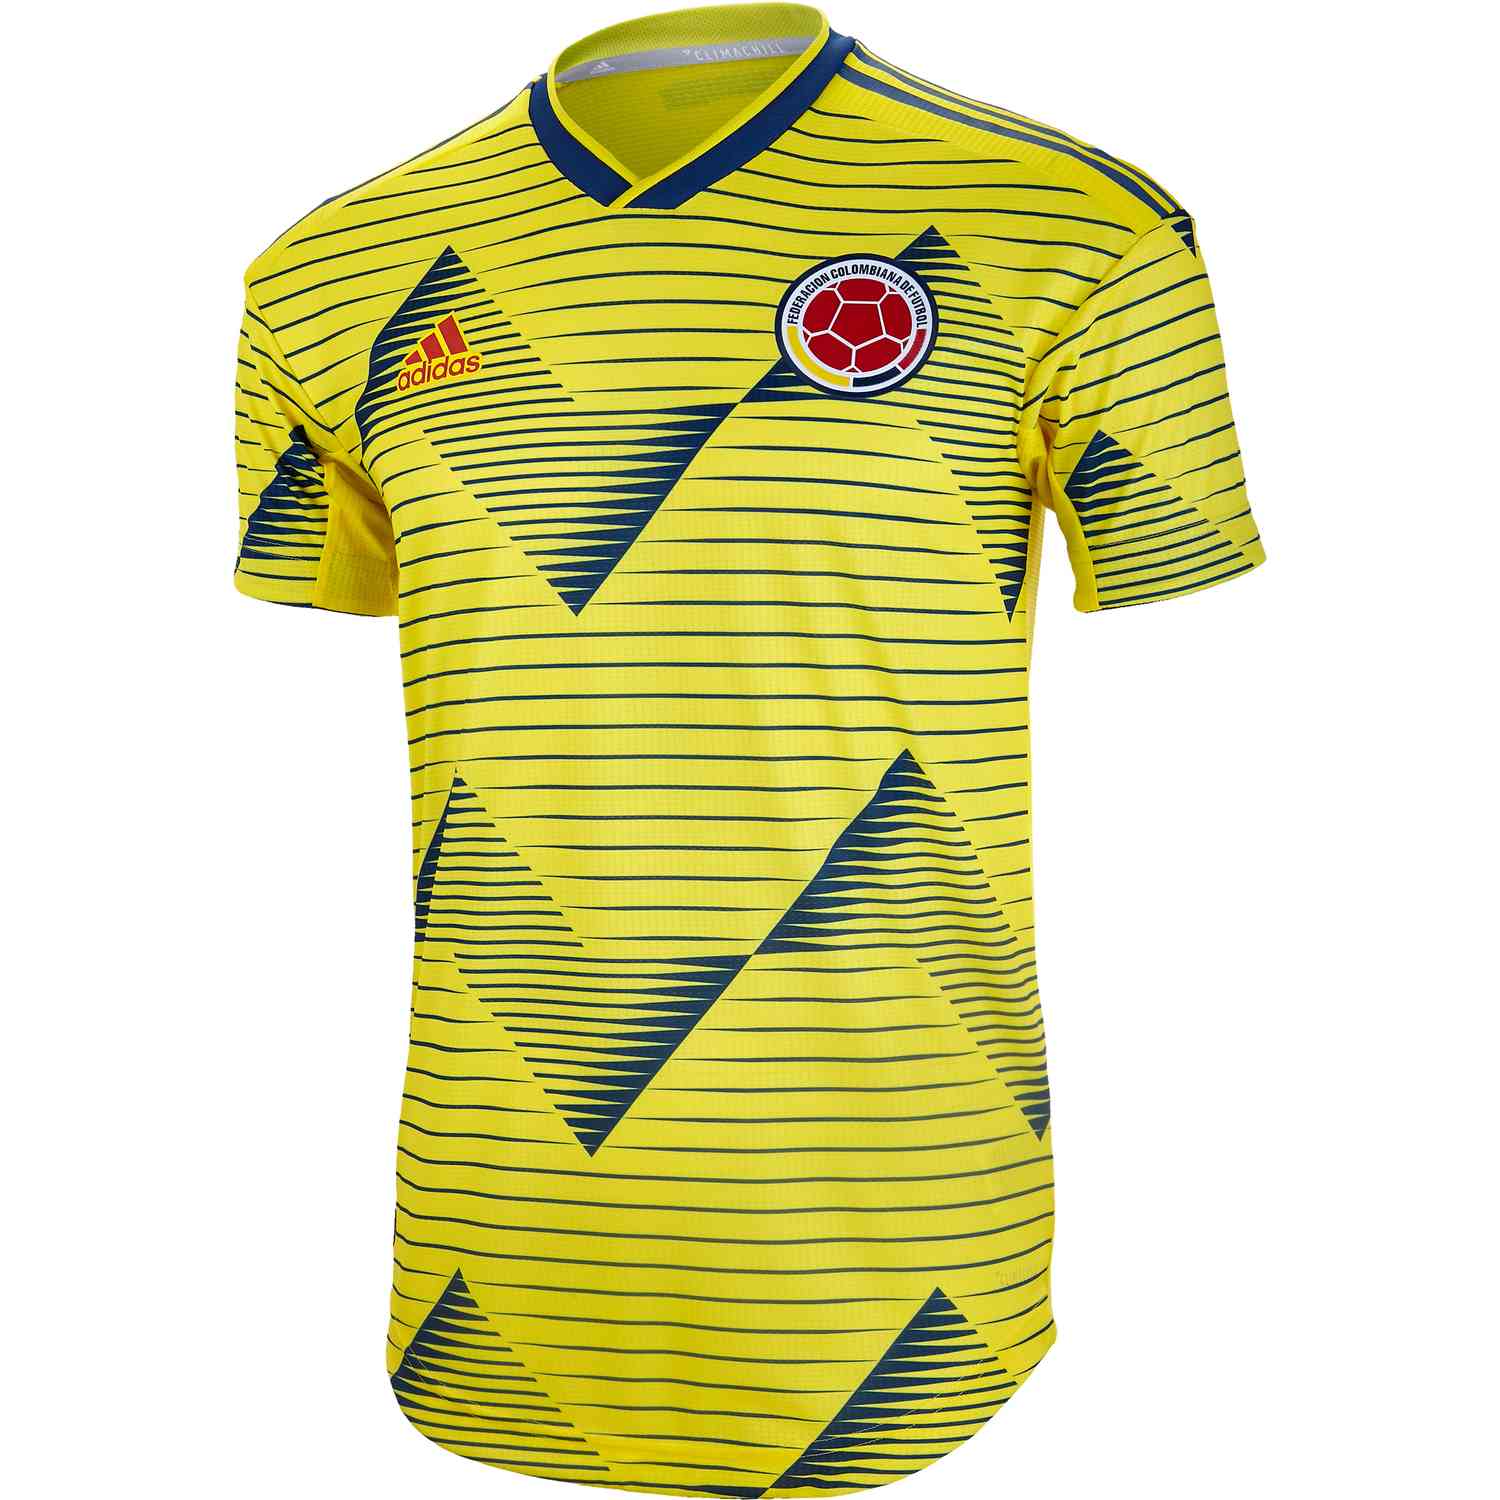 colombia jersey 2019